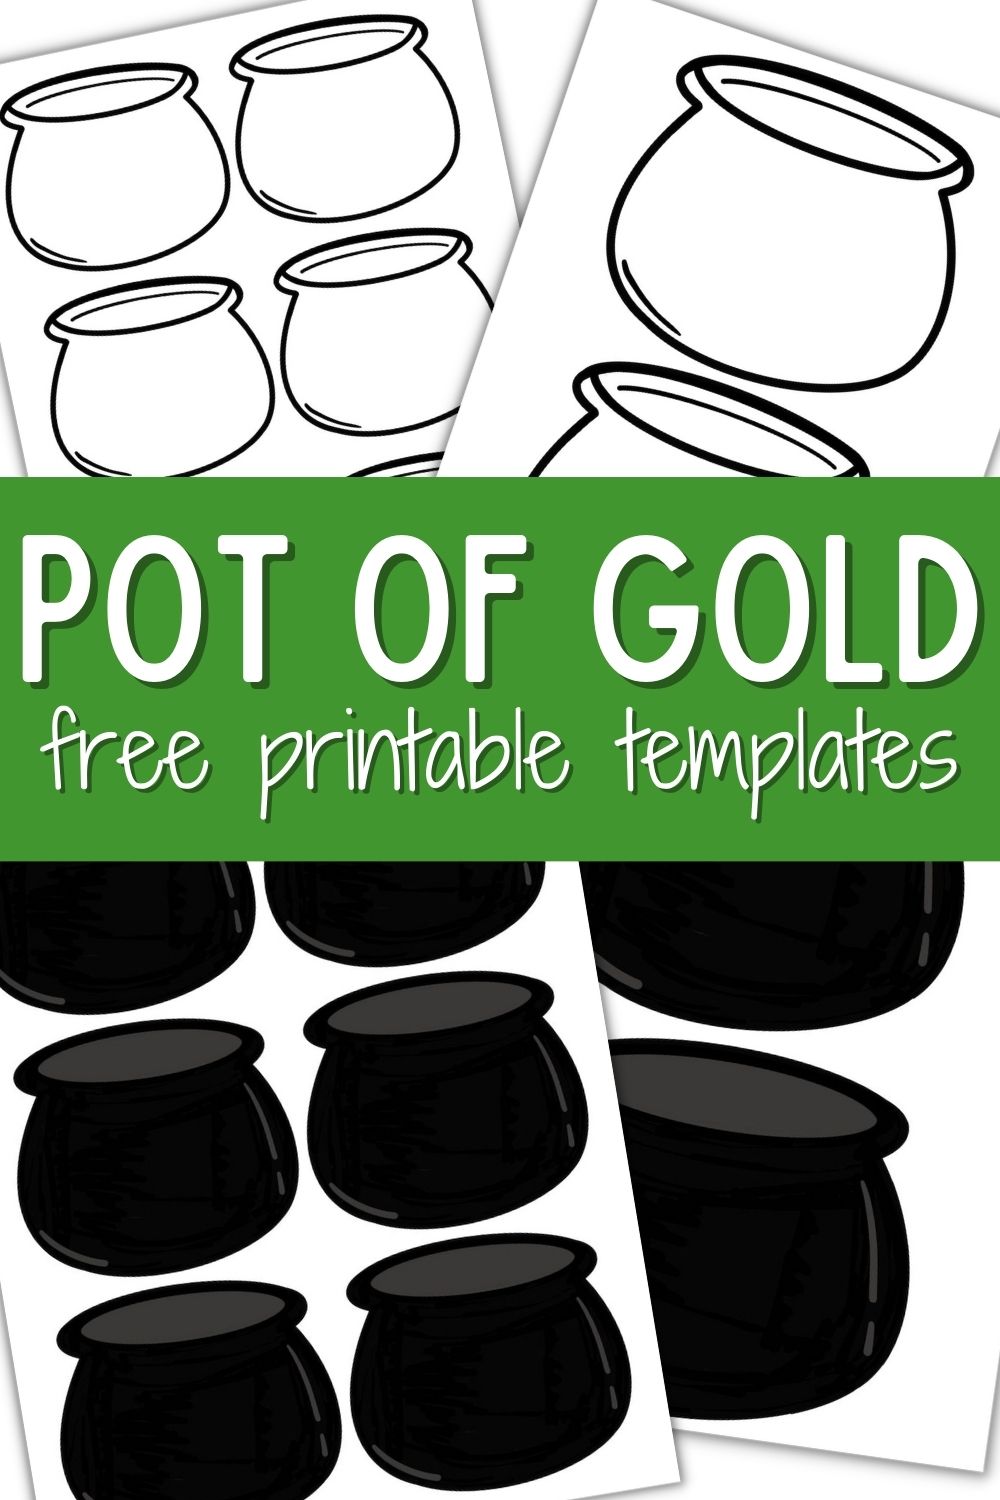 10 Pot of Gold Templates Perfect for St. Patricks Day Crafts! OriginalMOM